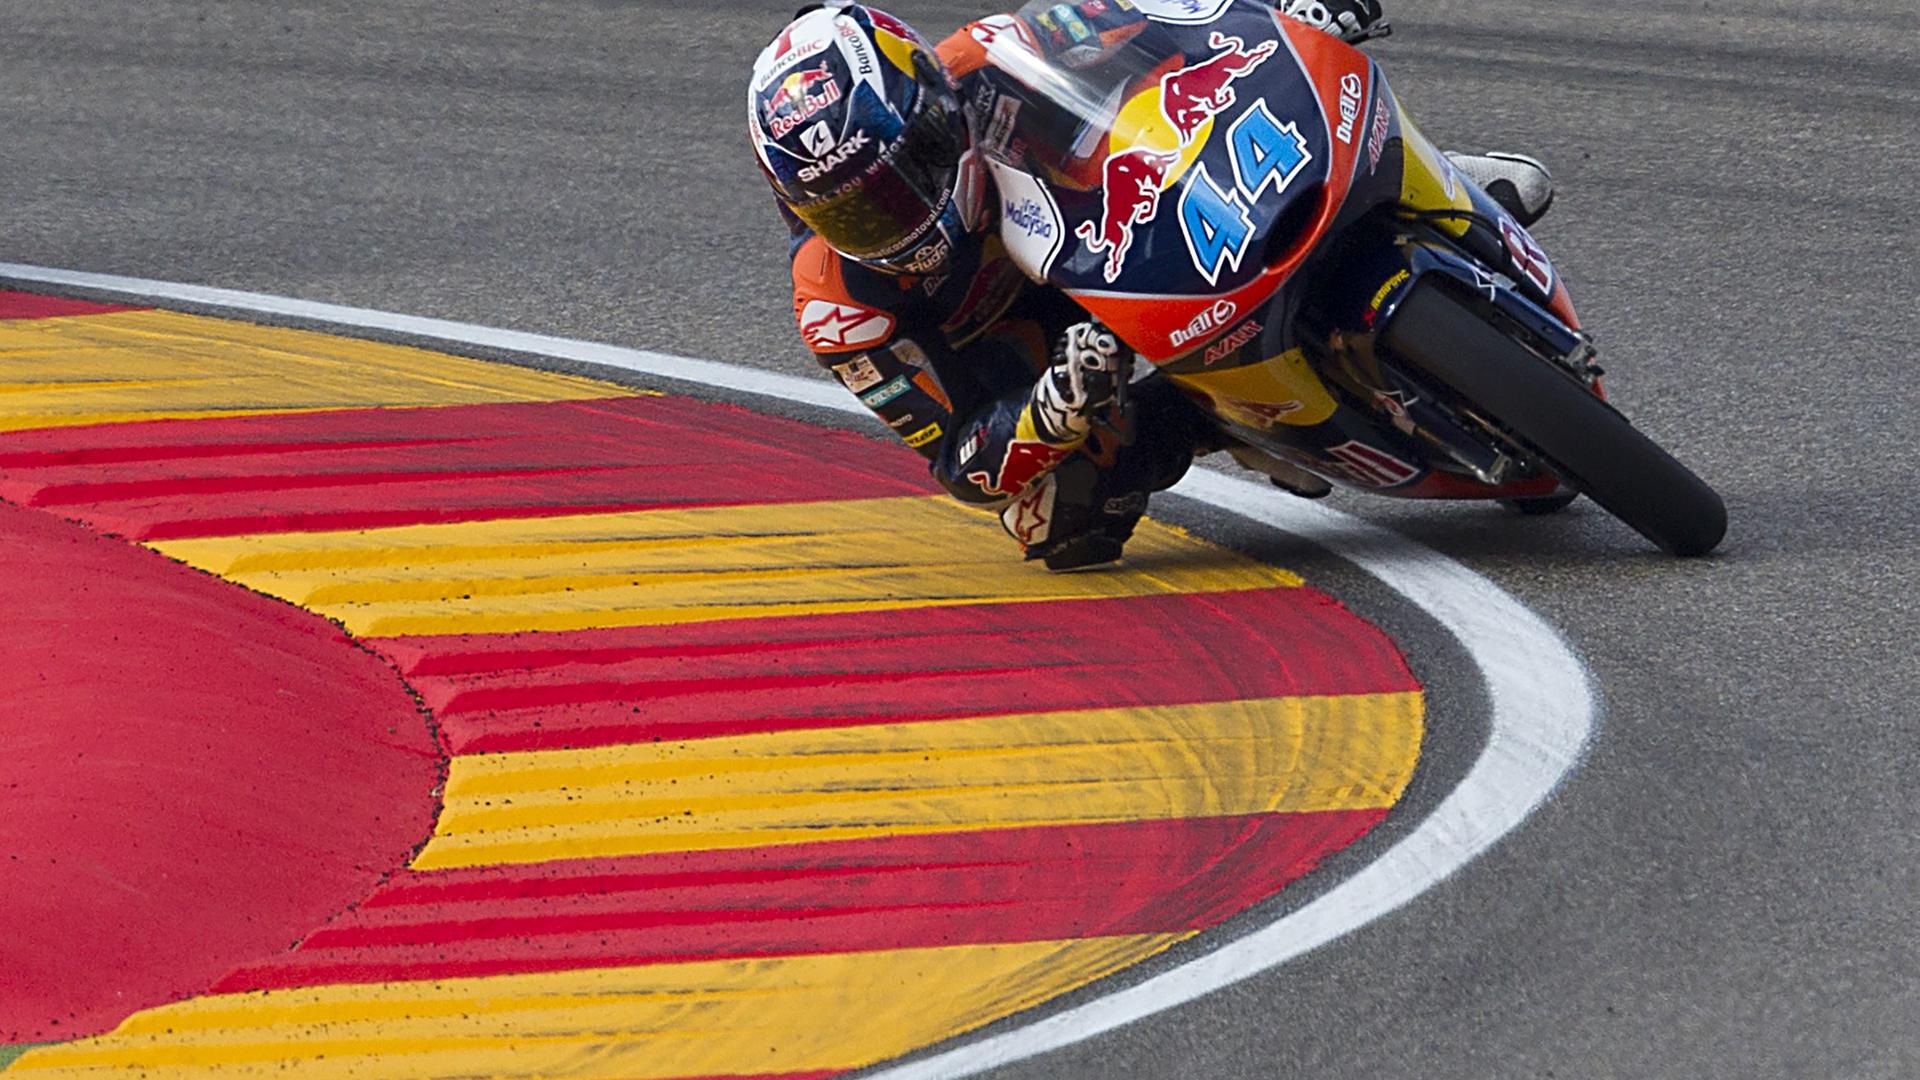 Red Bull KTM Ajo's Portuguese rider Miguel Oliveira competes during the Moto 3 race of the Aragon Grand Prix at the Motorland racetrack in Alcaniz on September 27, 2015. AFP PHOTO/ JAIME REINA